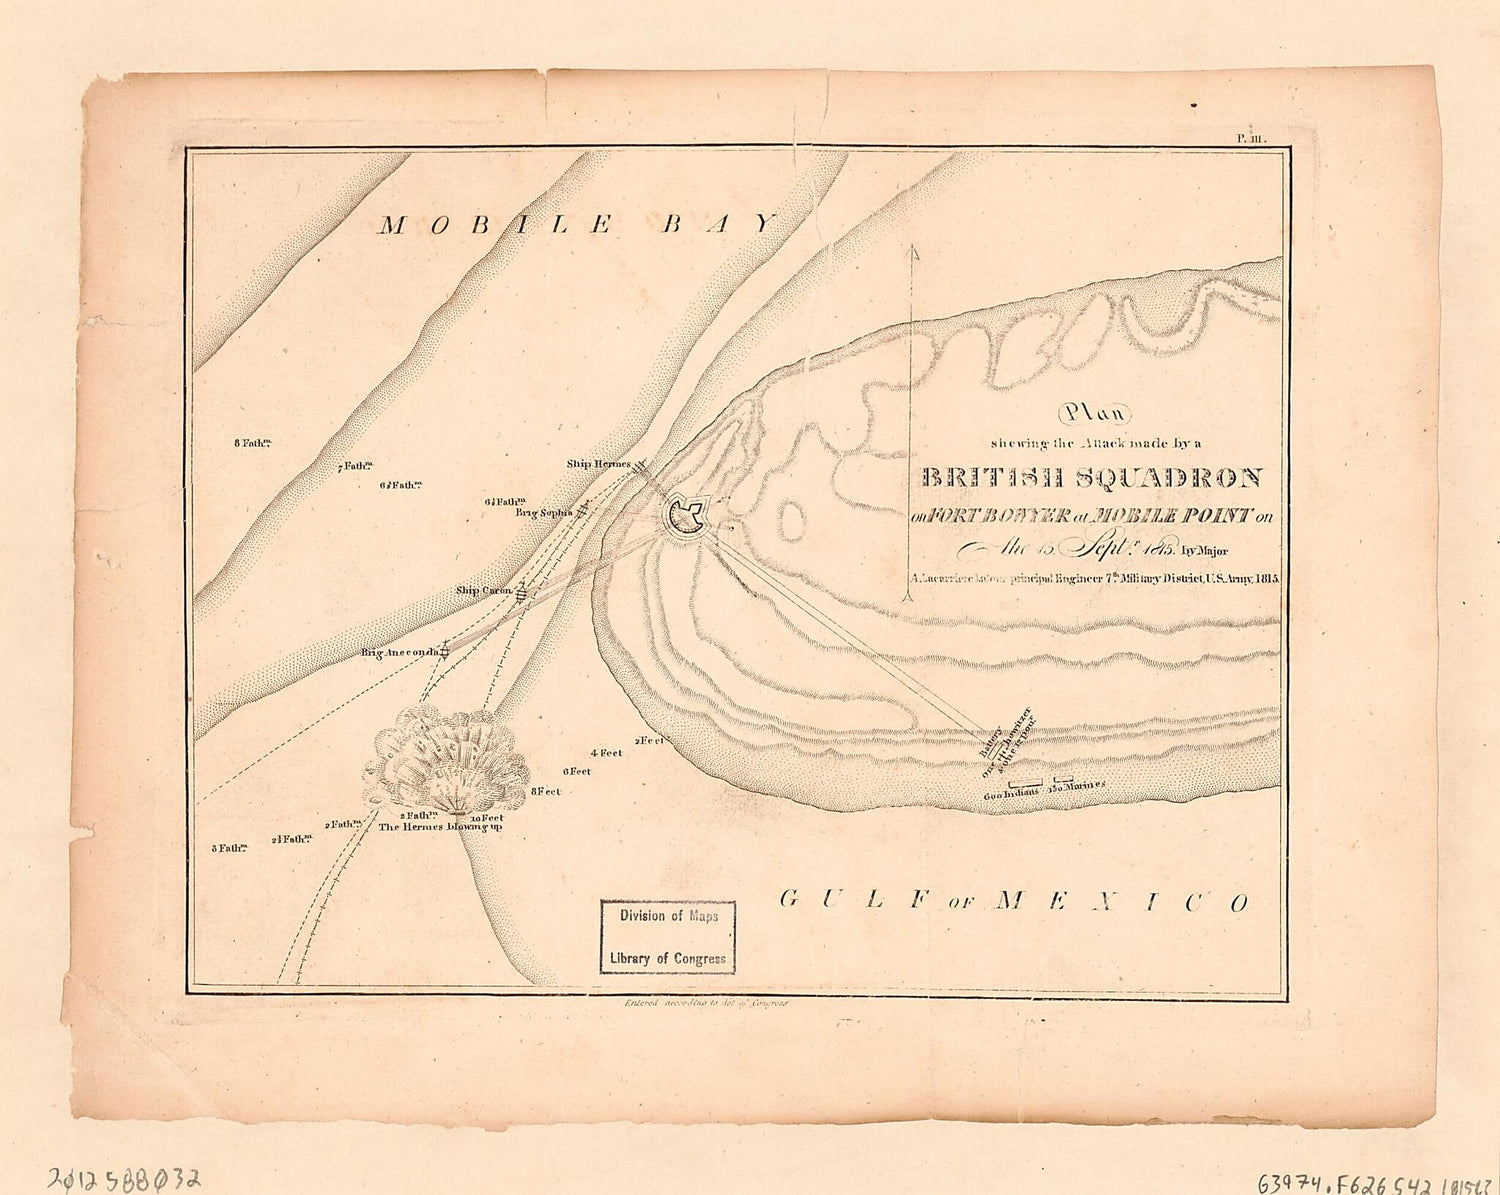 This old map of Plan Shewing the Attack Made by a British Squadron On Fort Bowyer at Mobile Point On the 15 Septr. from 1815 was created by Arsène Lacarrière Latour in 1815